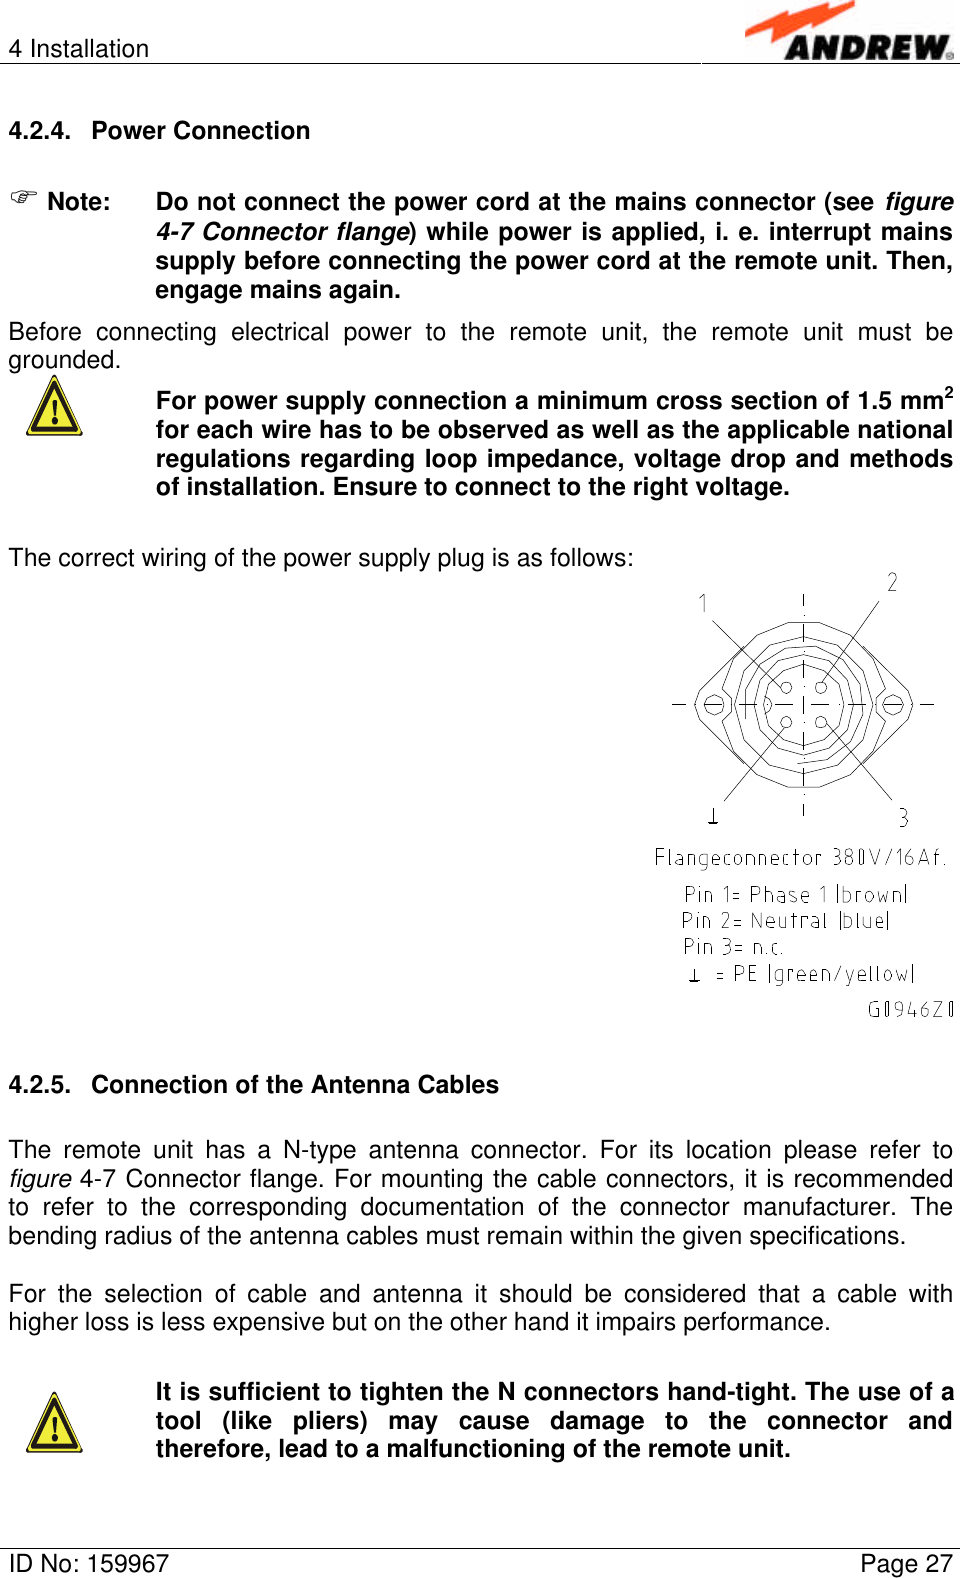 4 InstallationID No: 159967 Page 274.2.4. Power ConnectionF Note: Do not connect the power cord at the mains connector (see figure4-7 Connector flange) while power is applied, i. e. interrupt mainssupply before connecting the power cord at the remote unit. Then,engage mains again.Before connecting electrical power to the remote unit, the remote unit must begrounded.For power supply connection a minimum cross section of 1.5 mm2for each wire has to be observed as well as the applicable nationalregulations regarding loop impedance, voltage drop and methodsof installation. Ensure to connect to the right voltage.The correct wiring of the power supply plug is as follows:4.2.5. Connection of the Antenna CablesThe remote unit has a N-type antenna connector. For its location please refer tofigure 4-7 Connector flange. For mounting the cable connectors, it is recommendedto refer to the corresponding documentation of the connector manufacturer. Thebending radius of the antenna cables must remain within the given specifications.For the selection of cable and antenna it should be considered that a cable withhigher loss is less expensive but on the other hand it impairs performance.It is sufficient to tighten the N connectors hand-tight. The use of atool (like pliers) may cause damage to the connector andtherefore, lead to a malfunctioning of the remote unit.